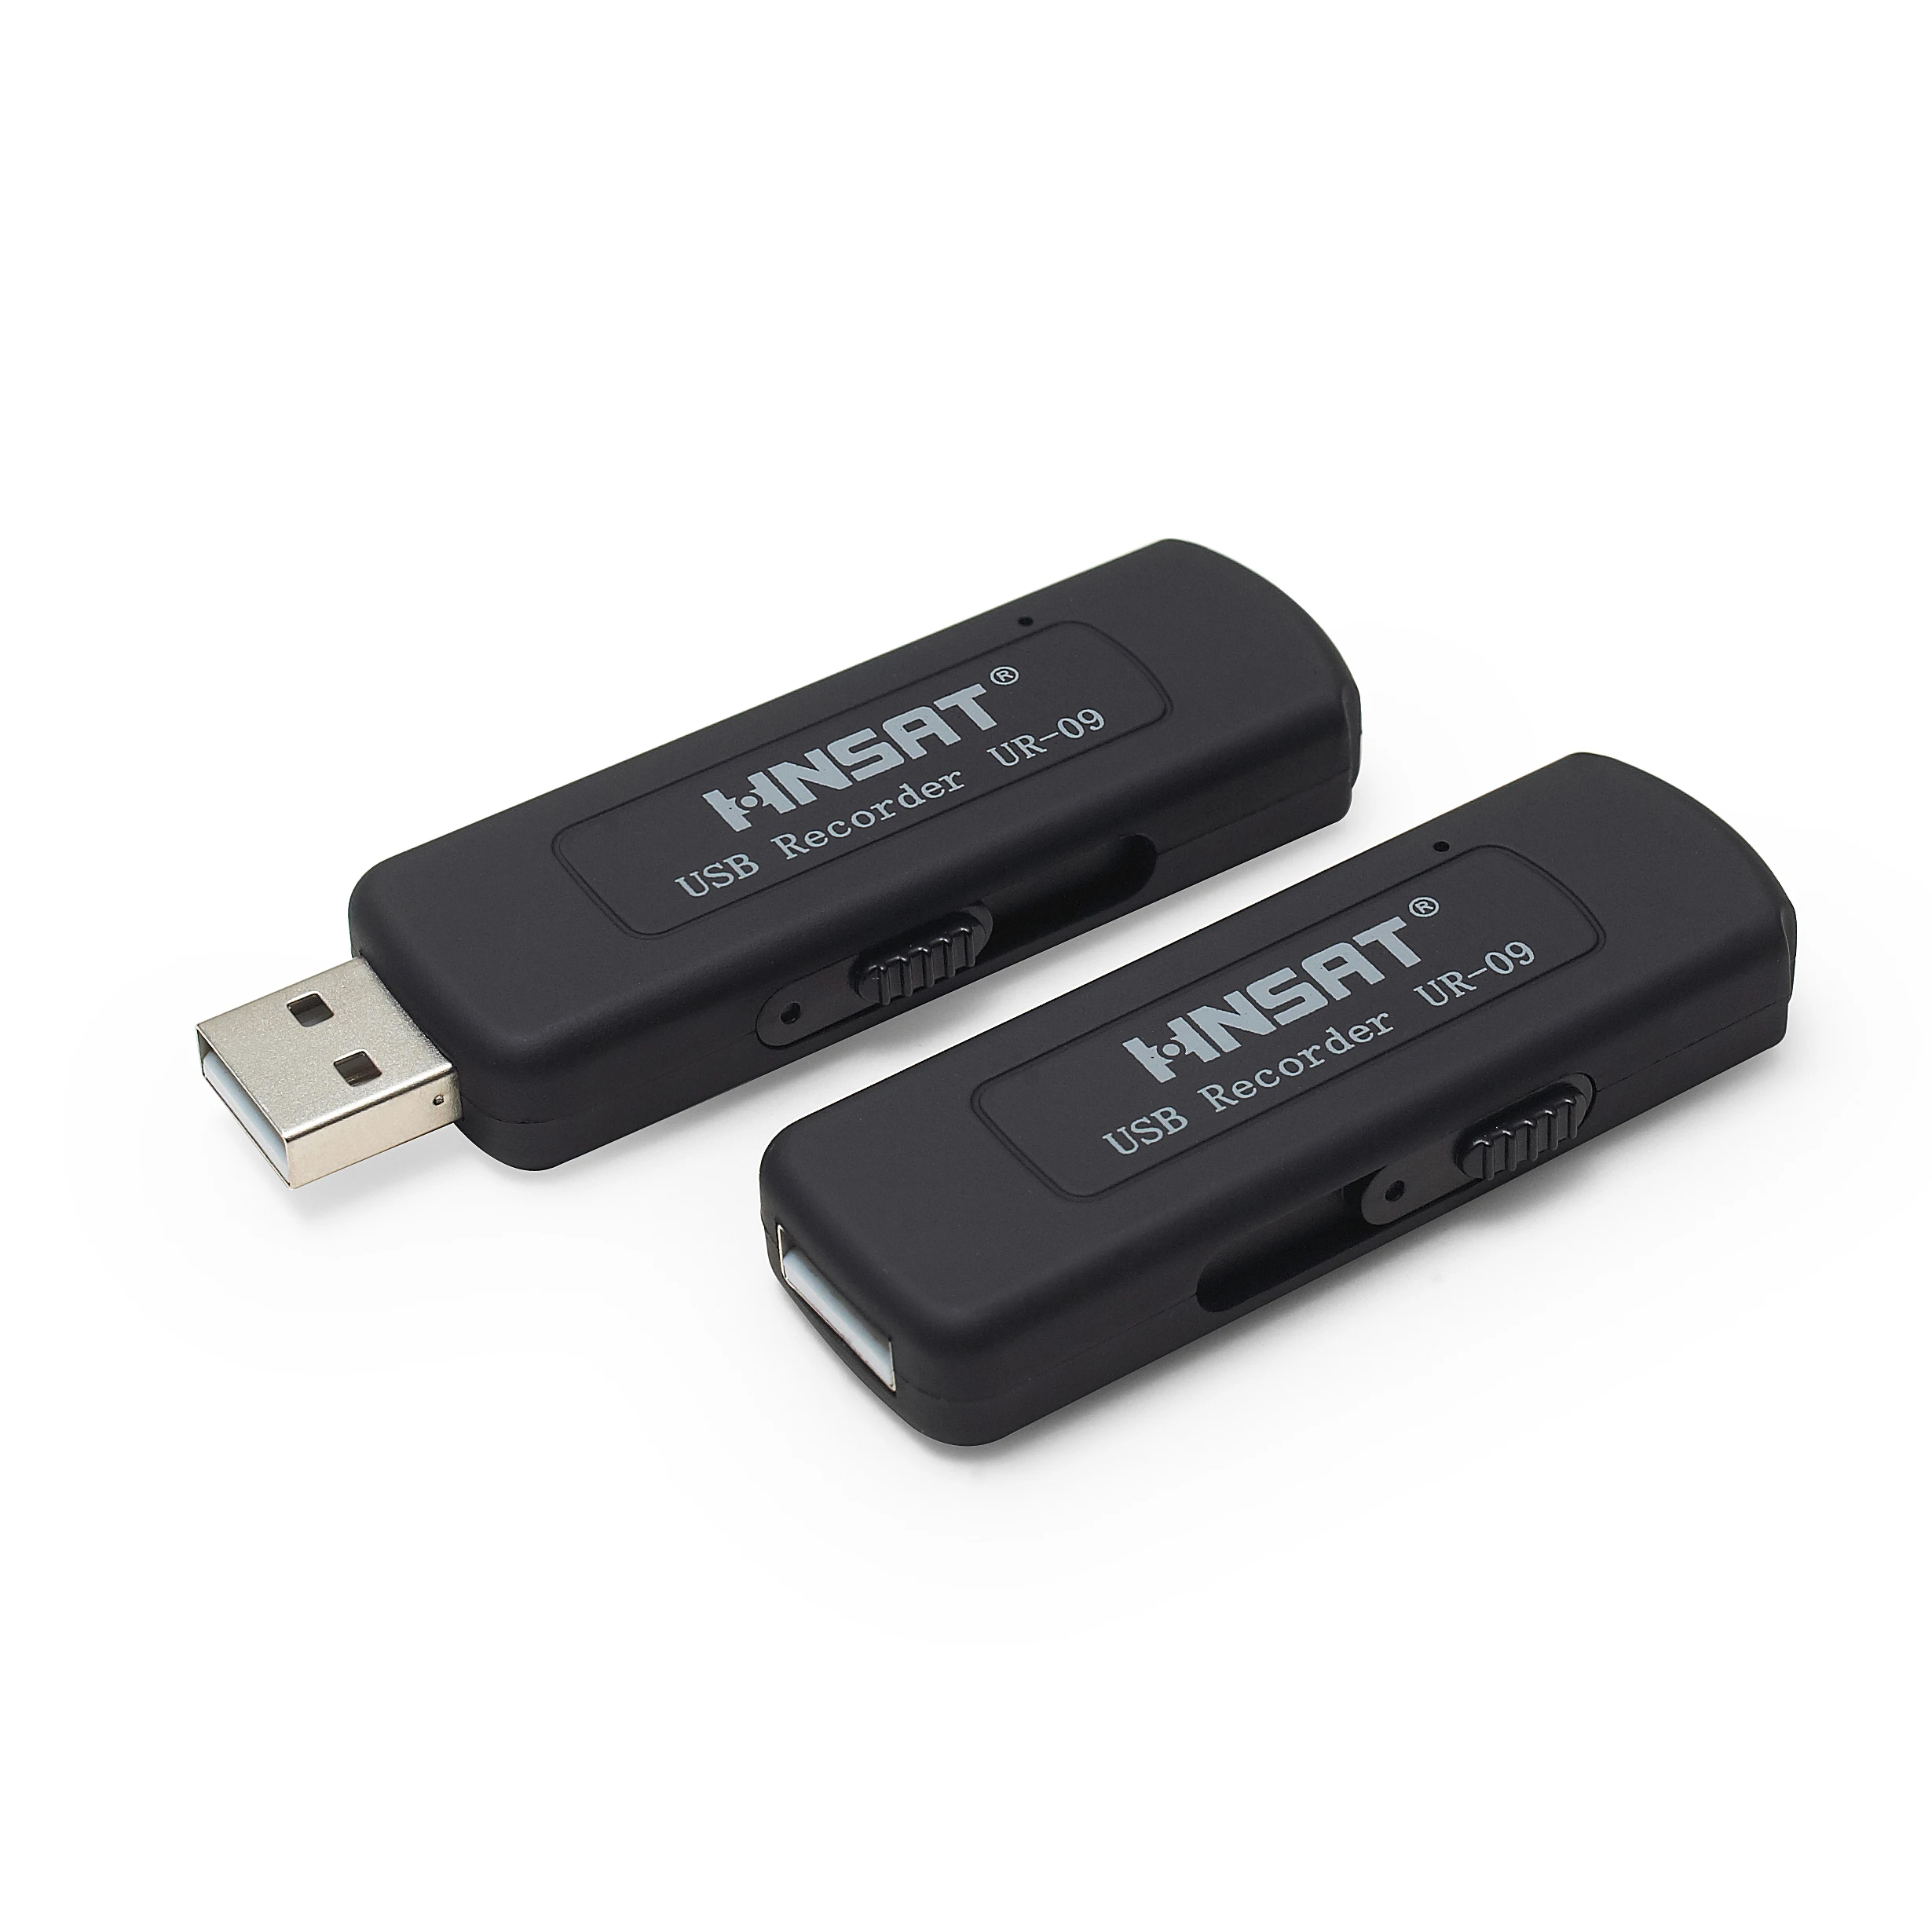 product-Hnsat-8GB USB Hidden Spy Voice Recording Devices easy to conceal and portable-img